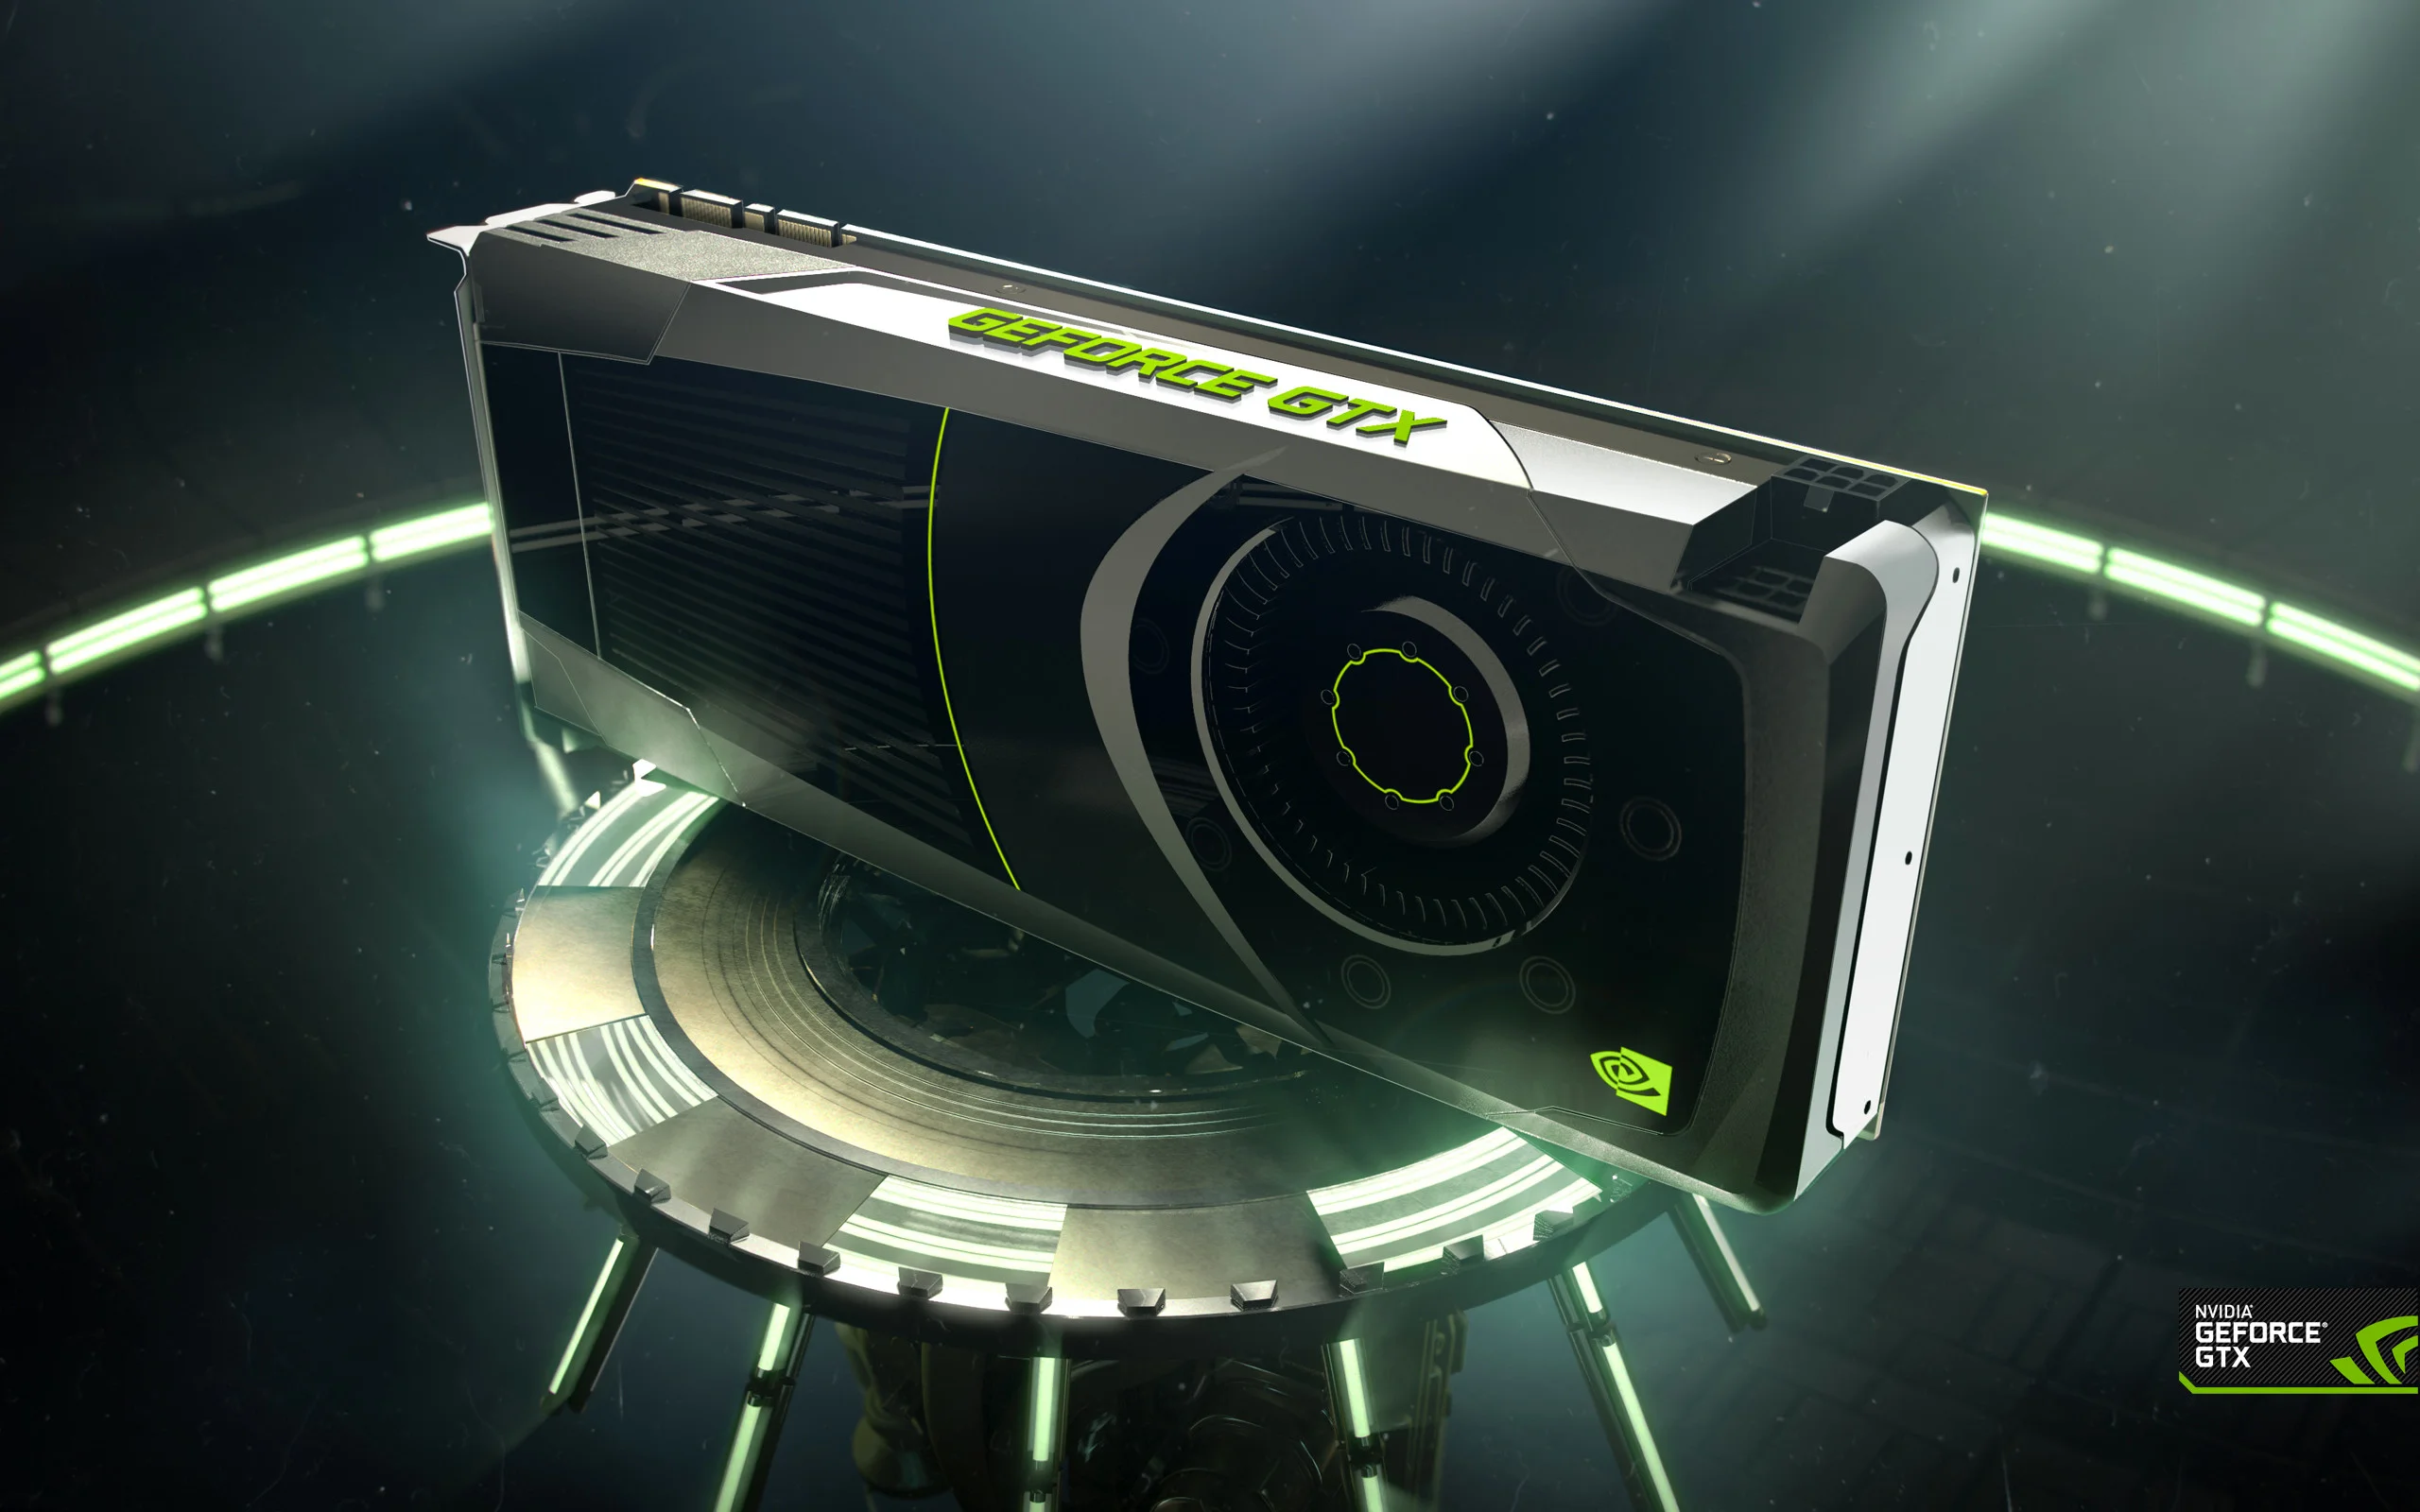 NVIDIA GeForce GTX 680 Wallpaper Now Available